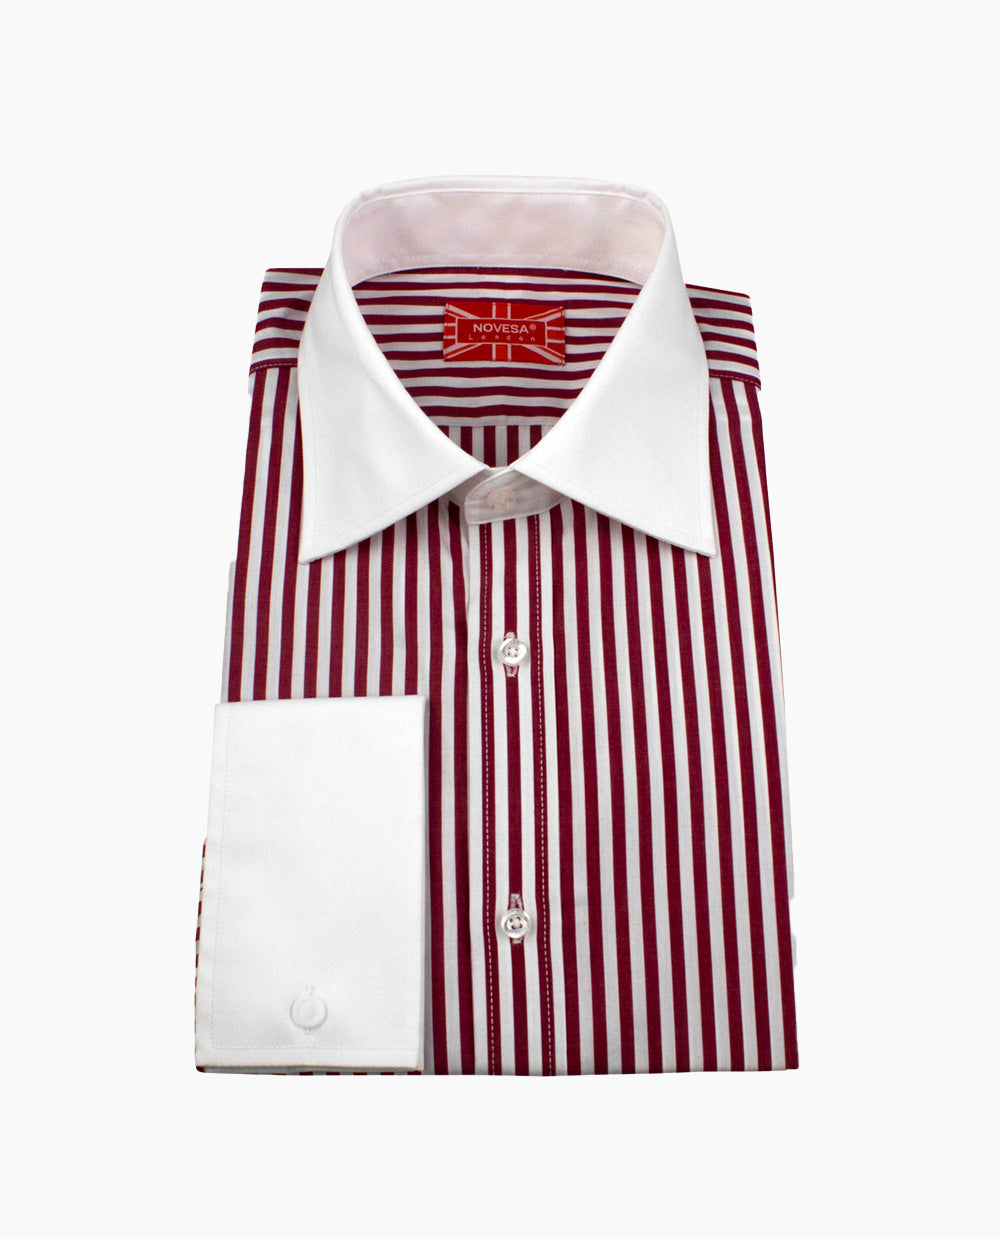 Red and White Contrast Collar and Cuff Shirt